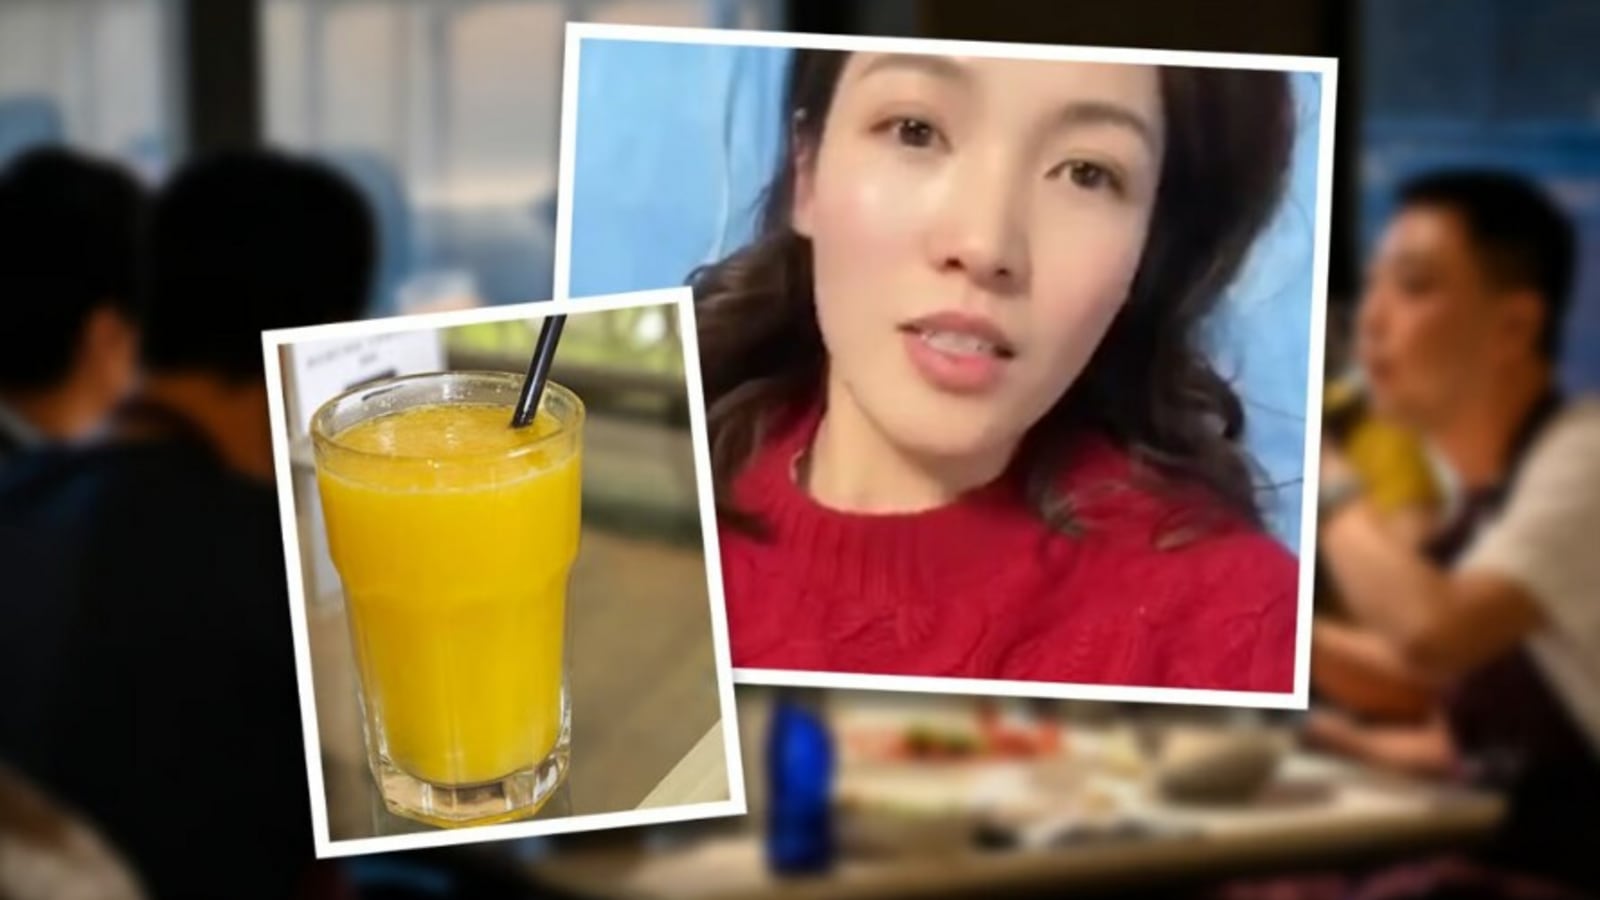 Waitress' blunder leaves 7 customers hospitalised in China. Here's what happened